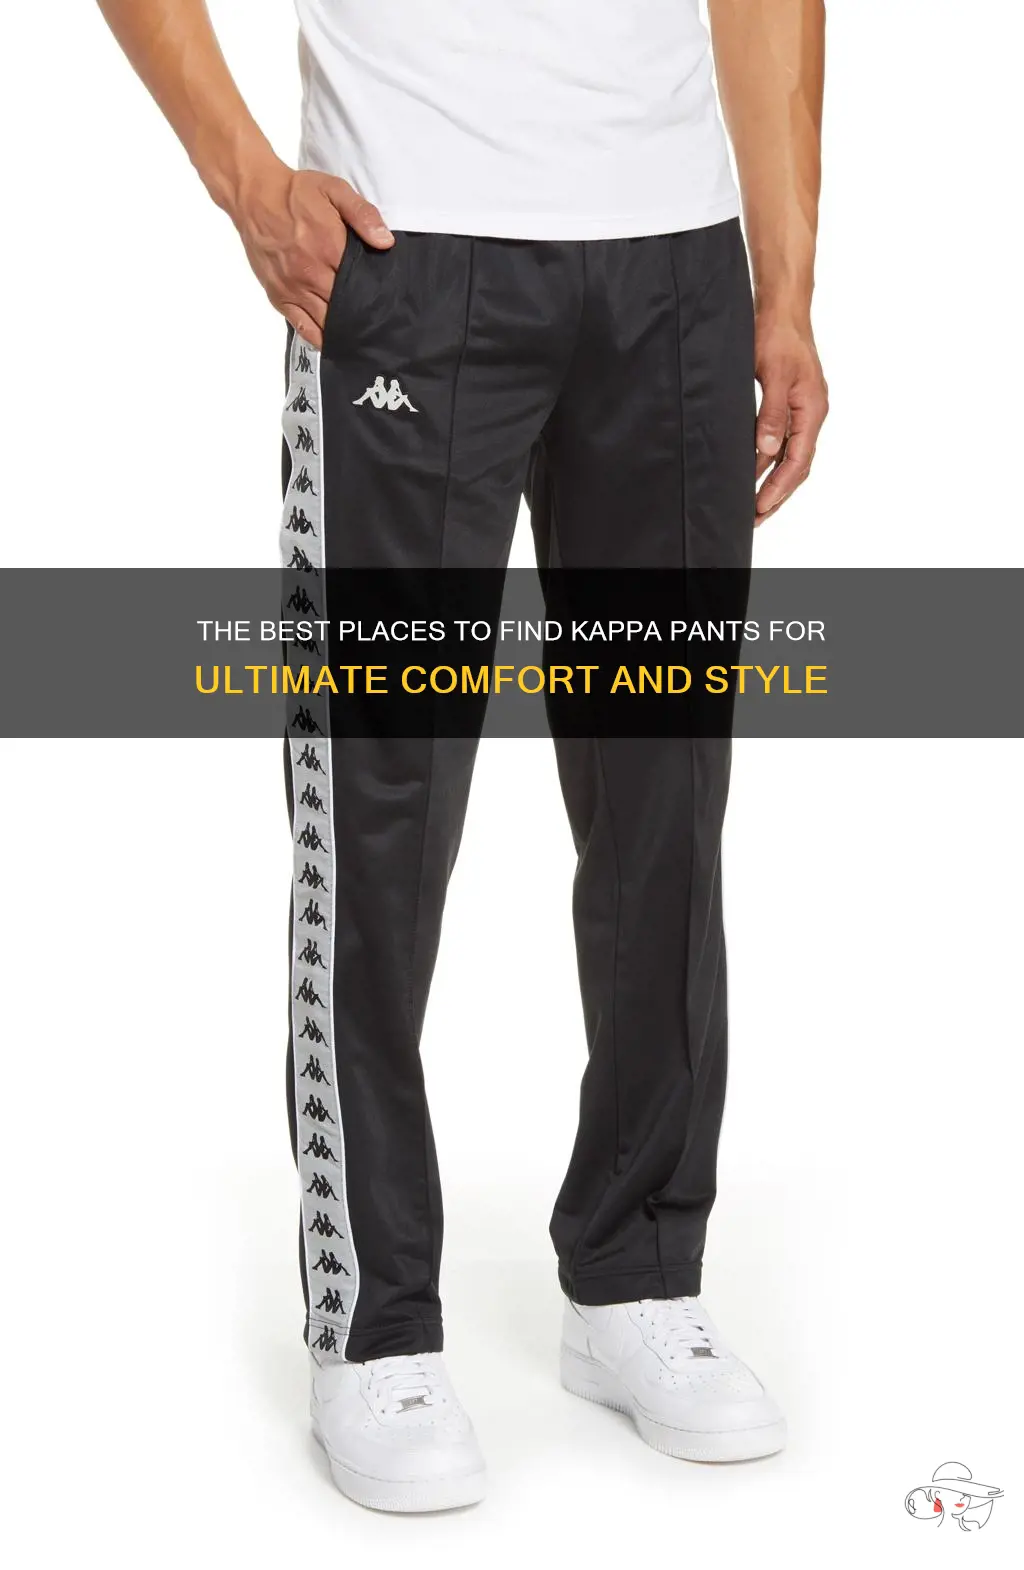 The Best Places To Find Kappa Pants For Ultimate Comfort And Style ...